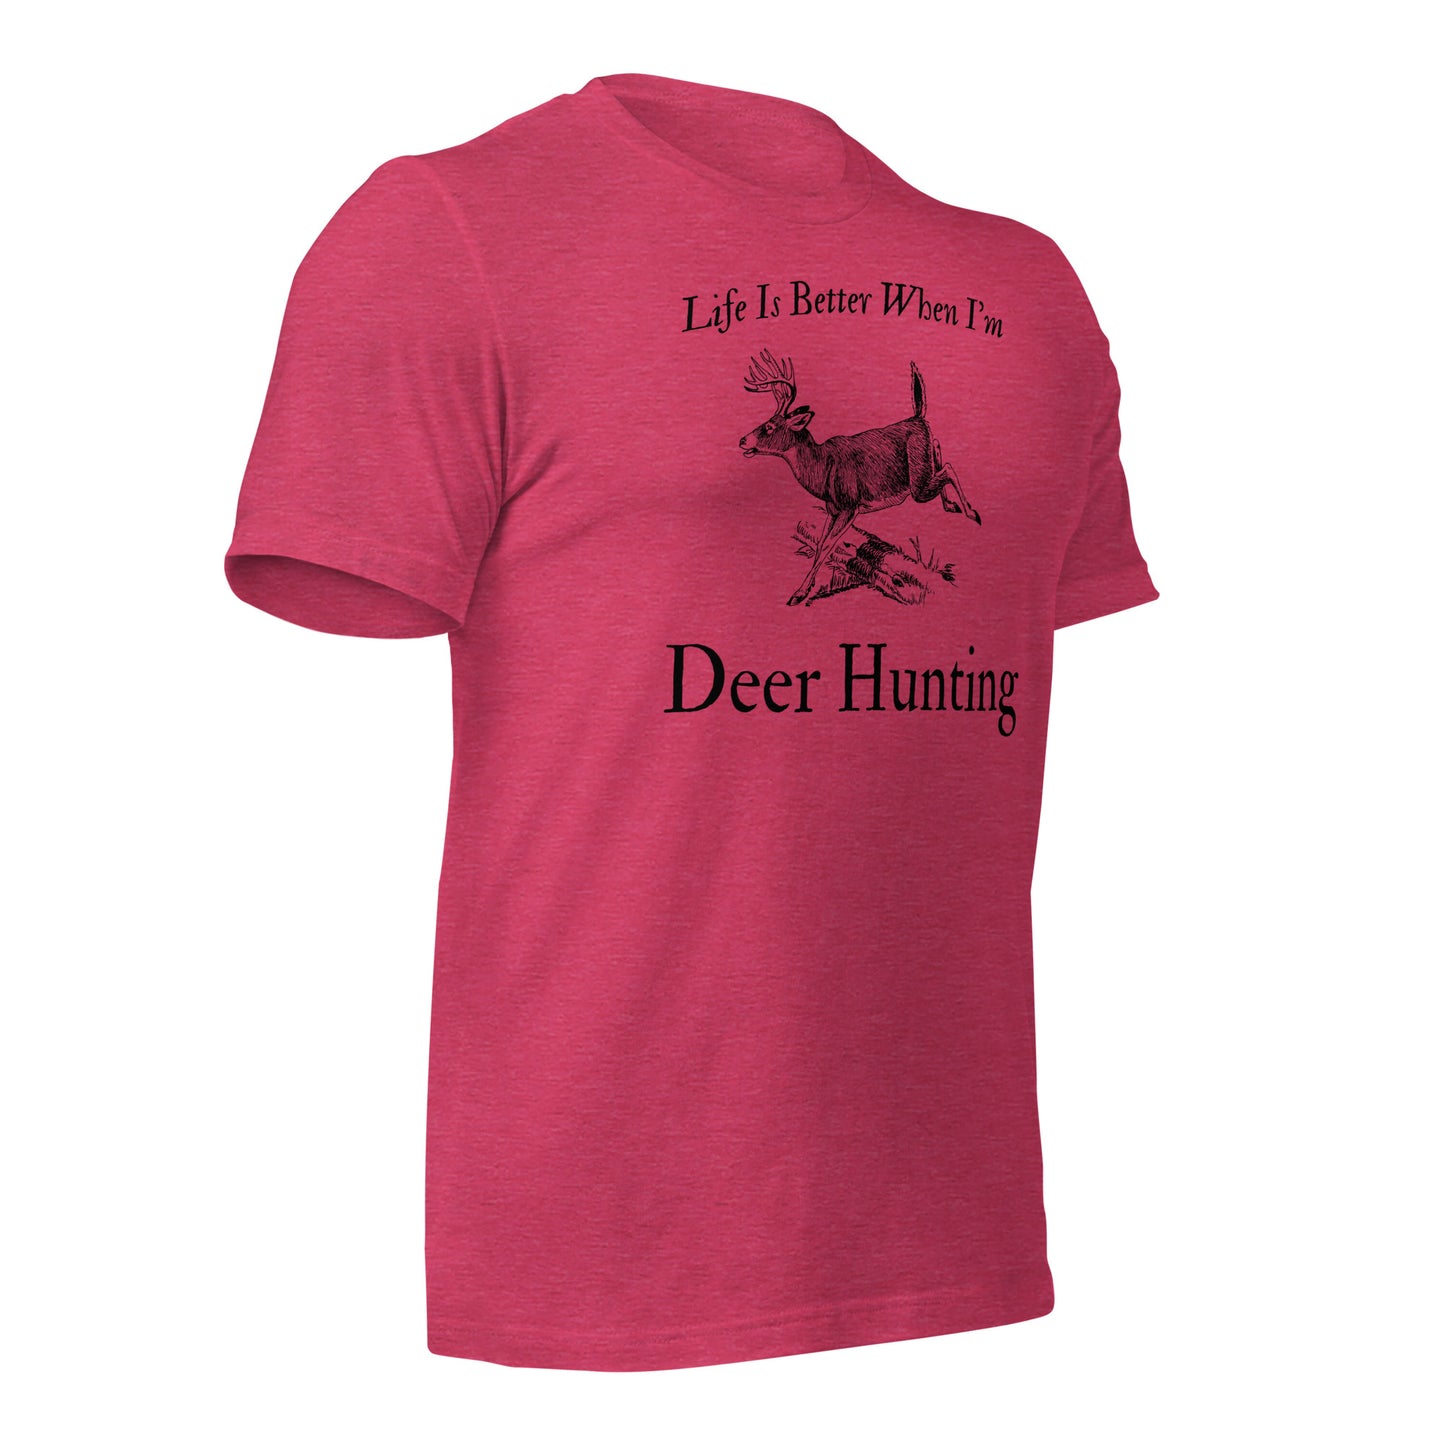 "Life Is Better When I'm Deer Hunting" T-Shirt - Weave Got Gifts - Unique Gifts You Won’t Find Anywhere Else!